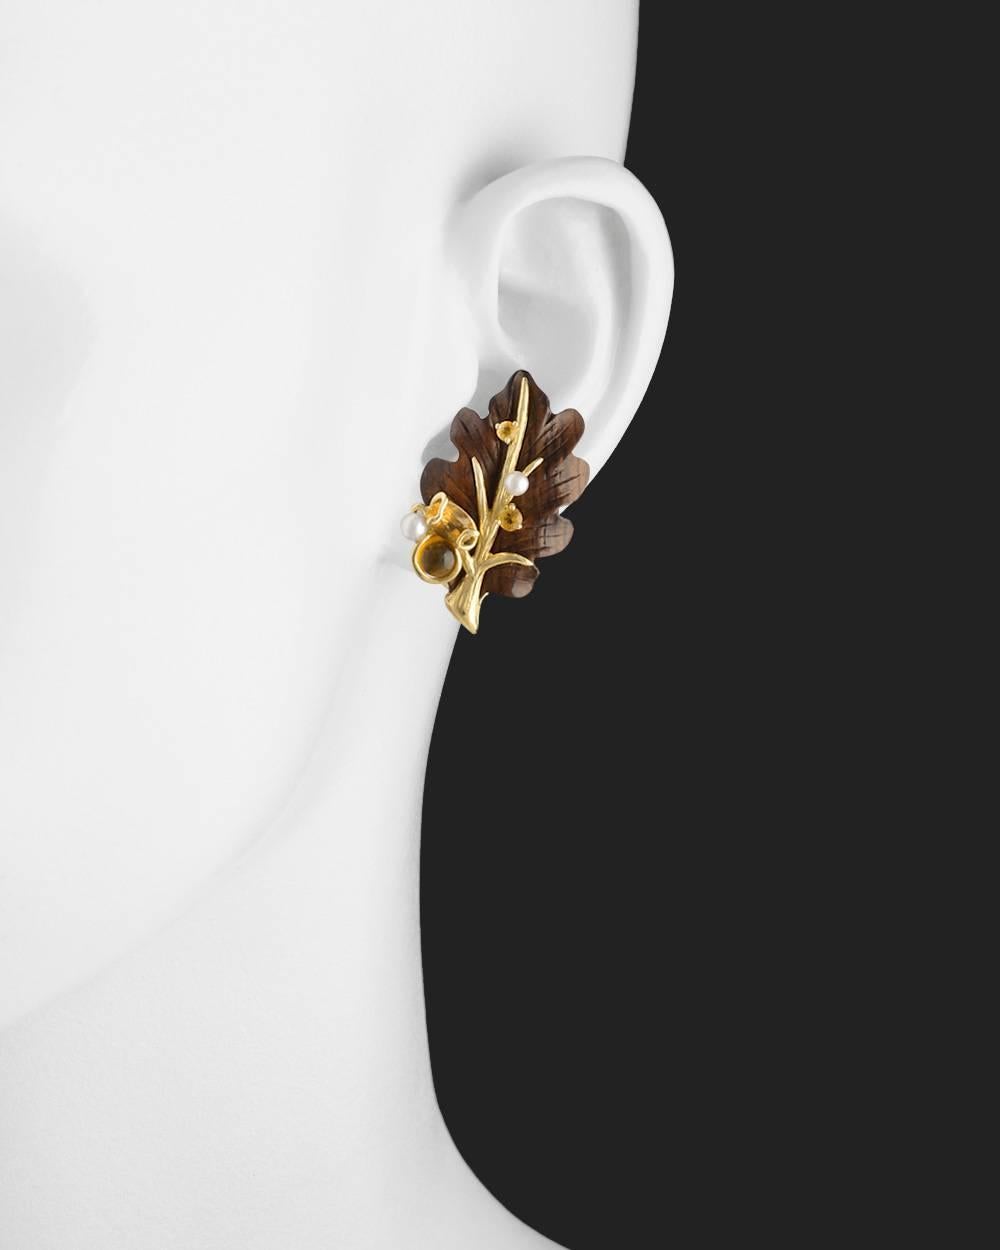 Leaf earrings, in carved rosewood and 18k yellow gold, accented by various-shaped citrines and small round pearls, numbered 20394, signed Seaman Schepps. Clip backs with posts. 1.3